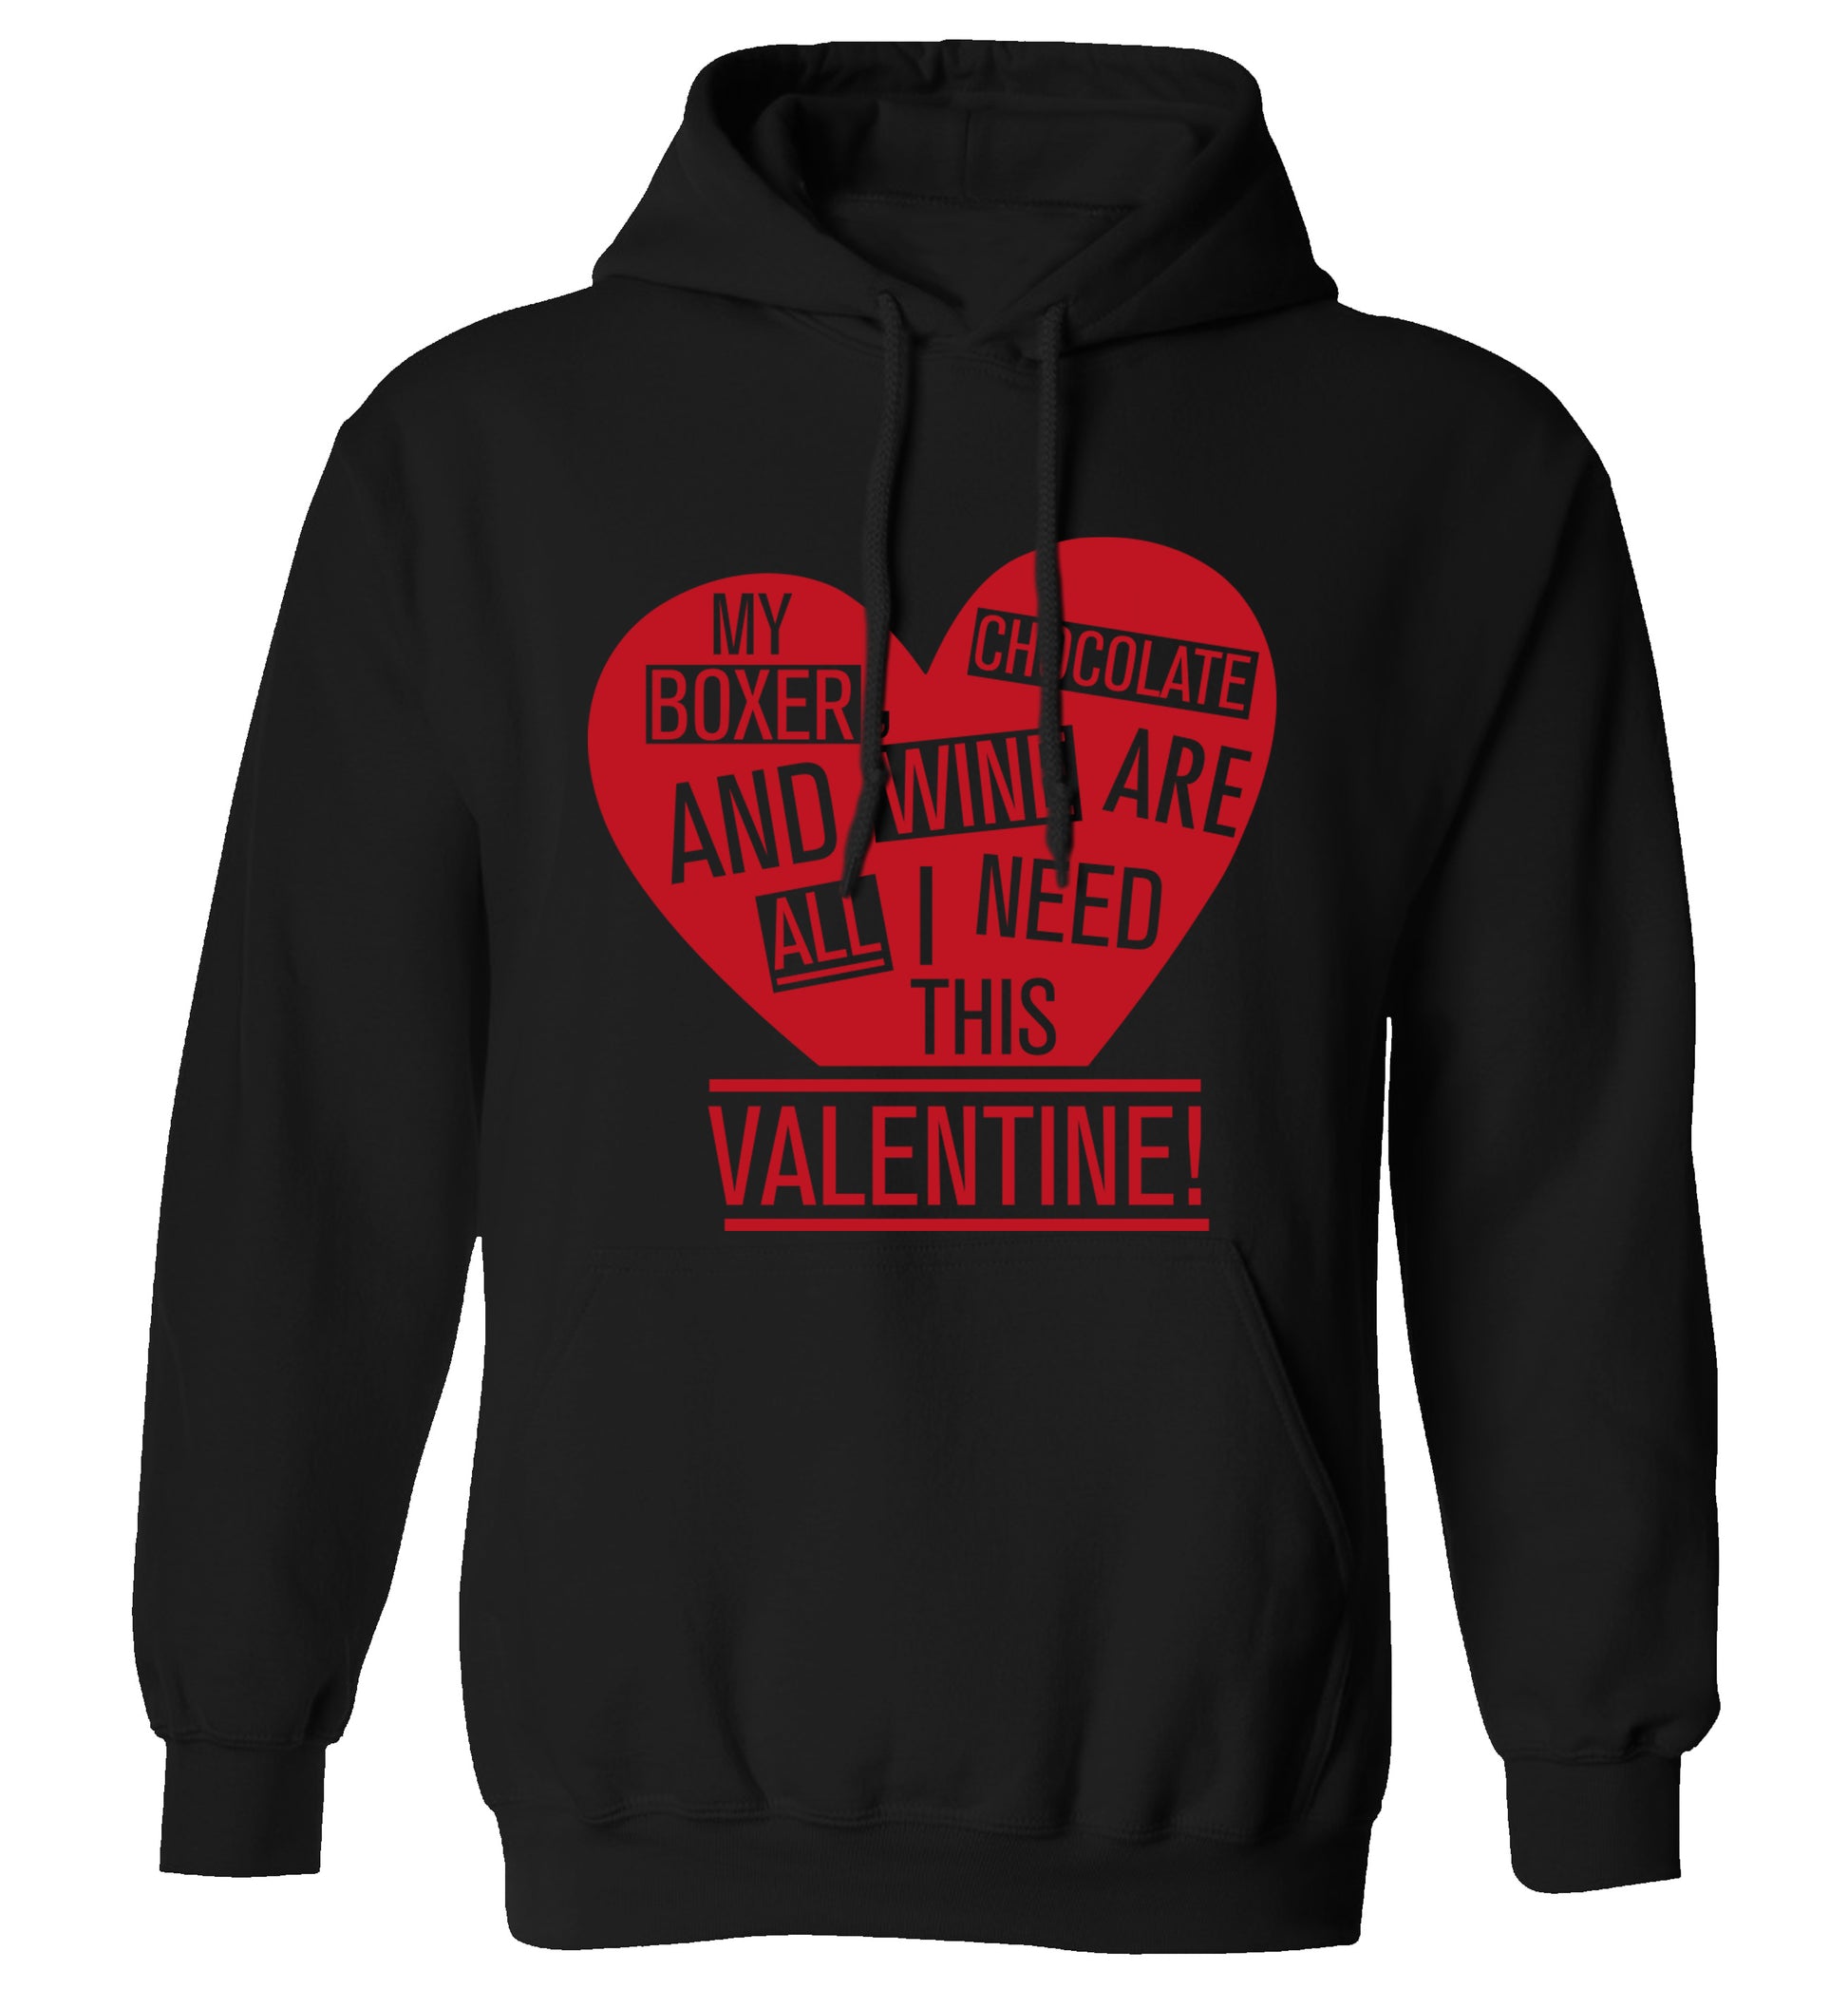 My Boxer, chocolate and wine are all I need this valentine! adults unisex black hoodie 2XL